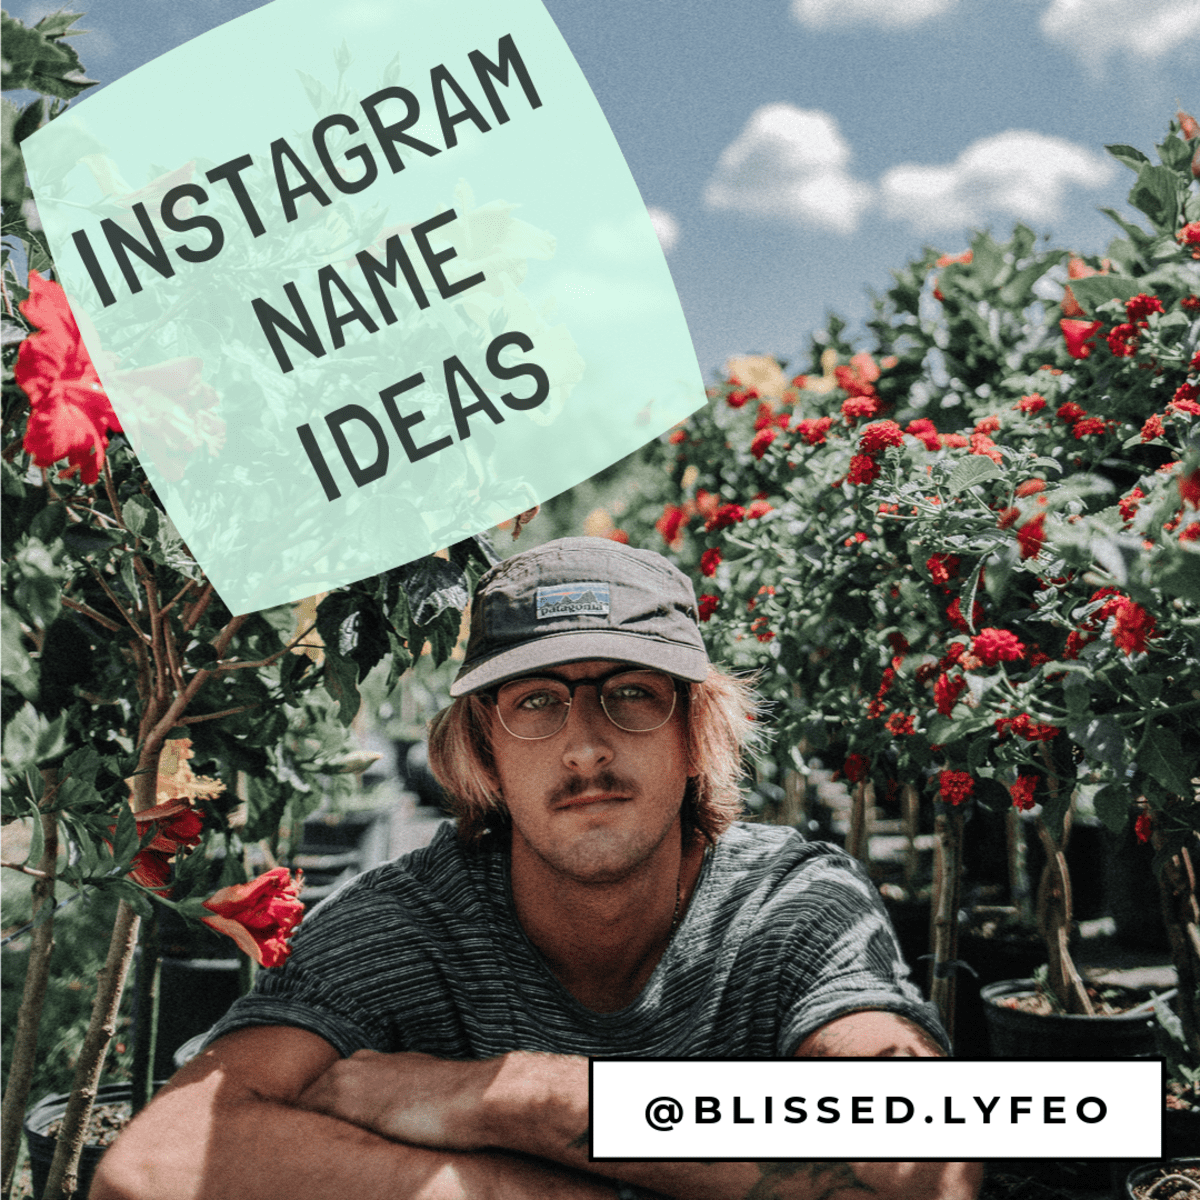 80+ Catchy Instagram Username Ideas You Can Steal